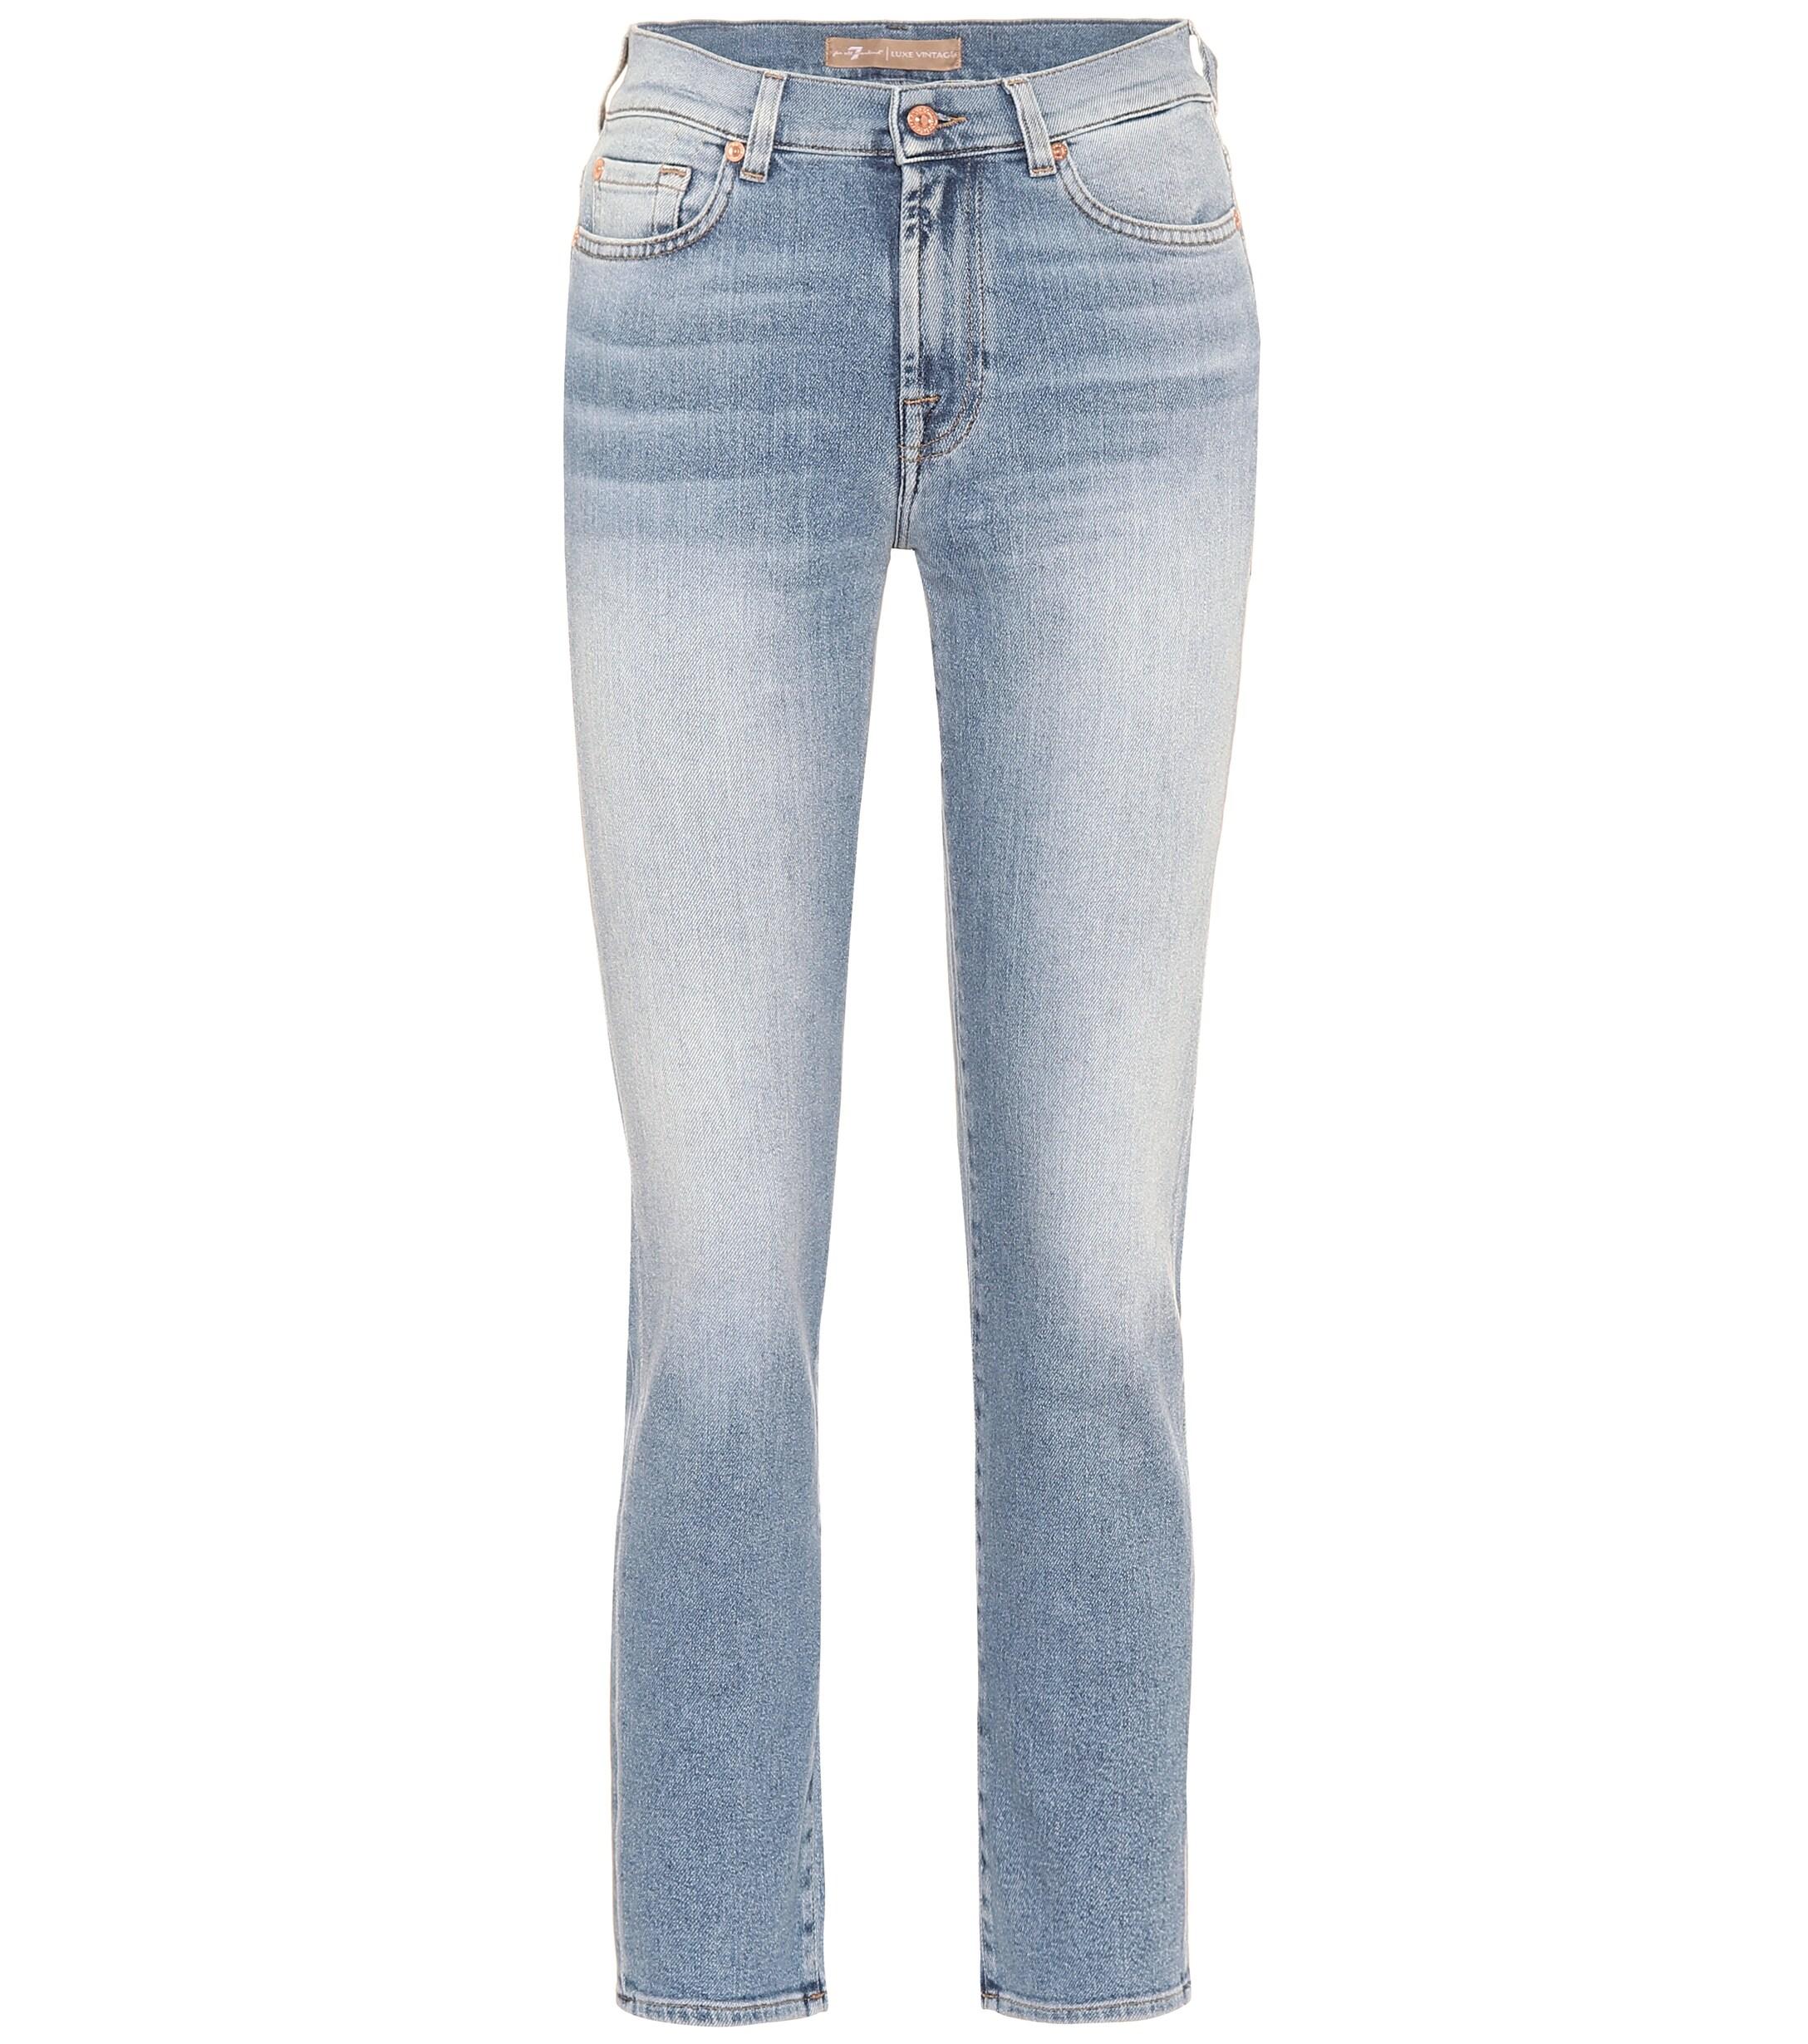 7 For All Mankind Denim Roxanne Mid-rise Skinny Jeans in Blue - Lyst